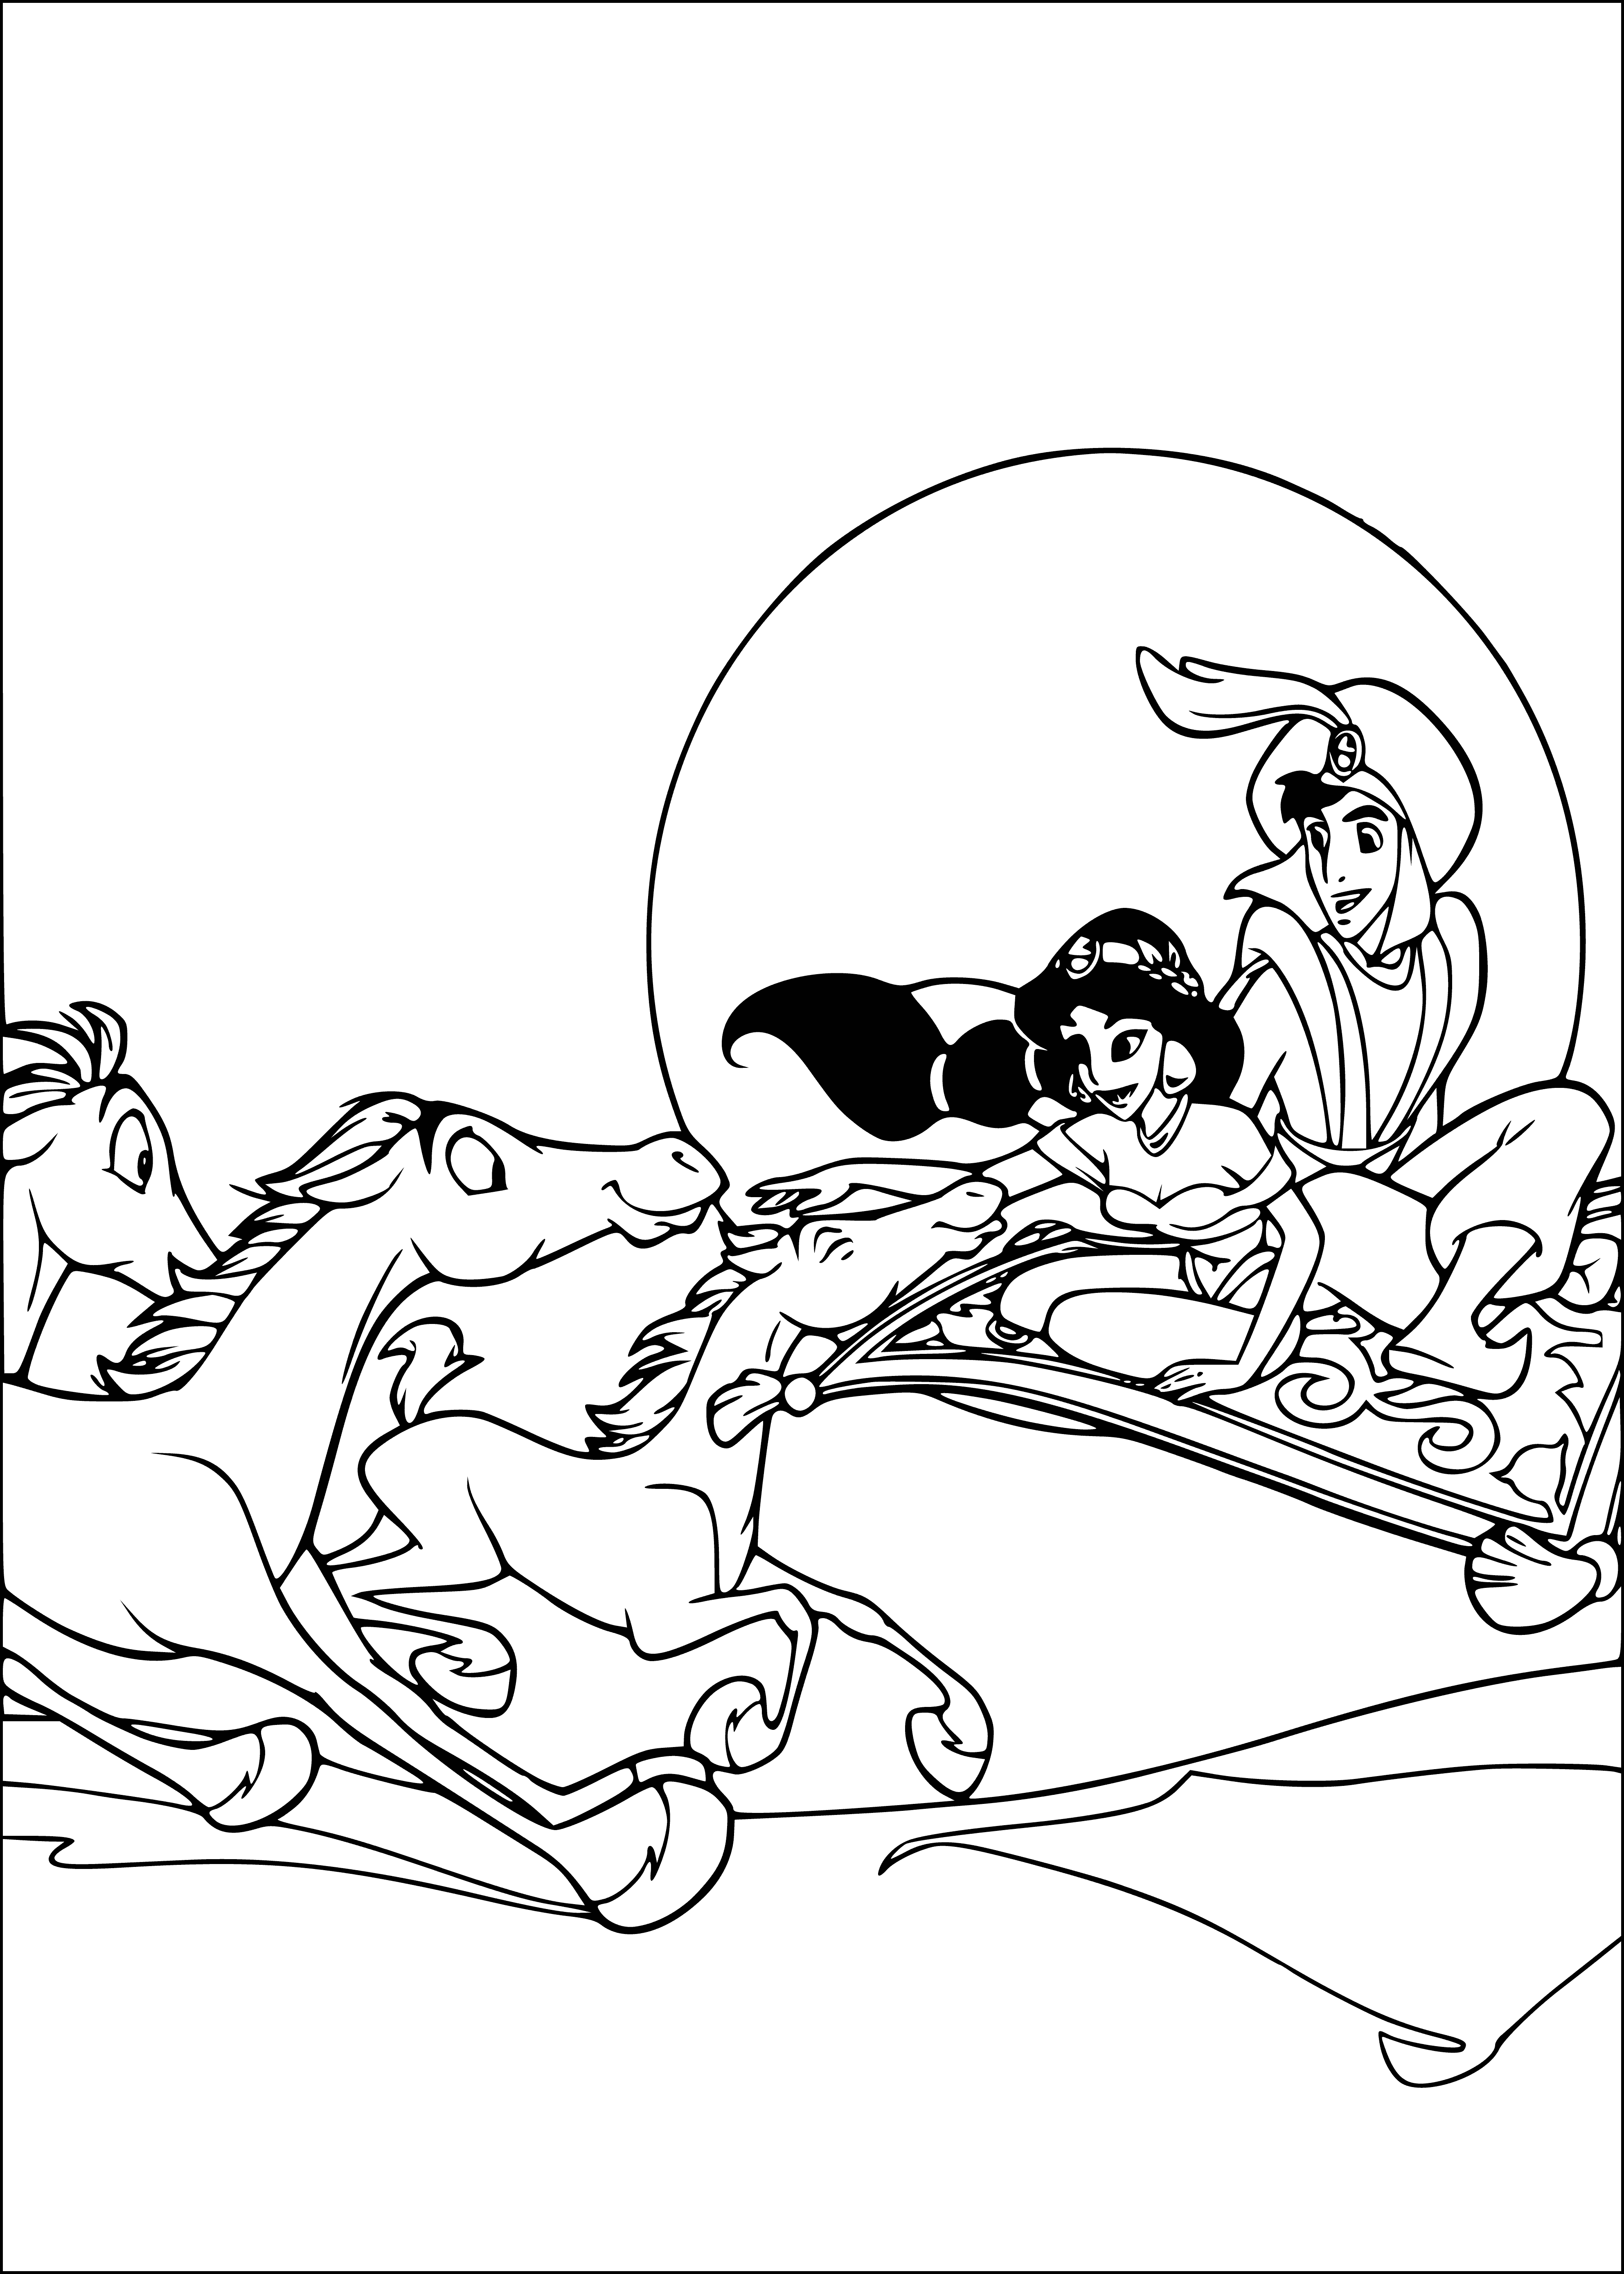 coloring page: Man on a flying carpet in the desert with birds and a large moon in the sky.